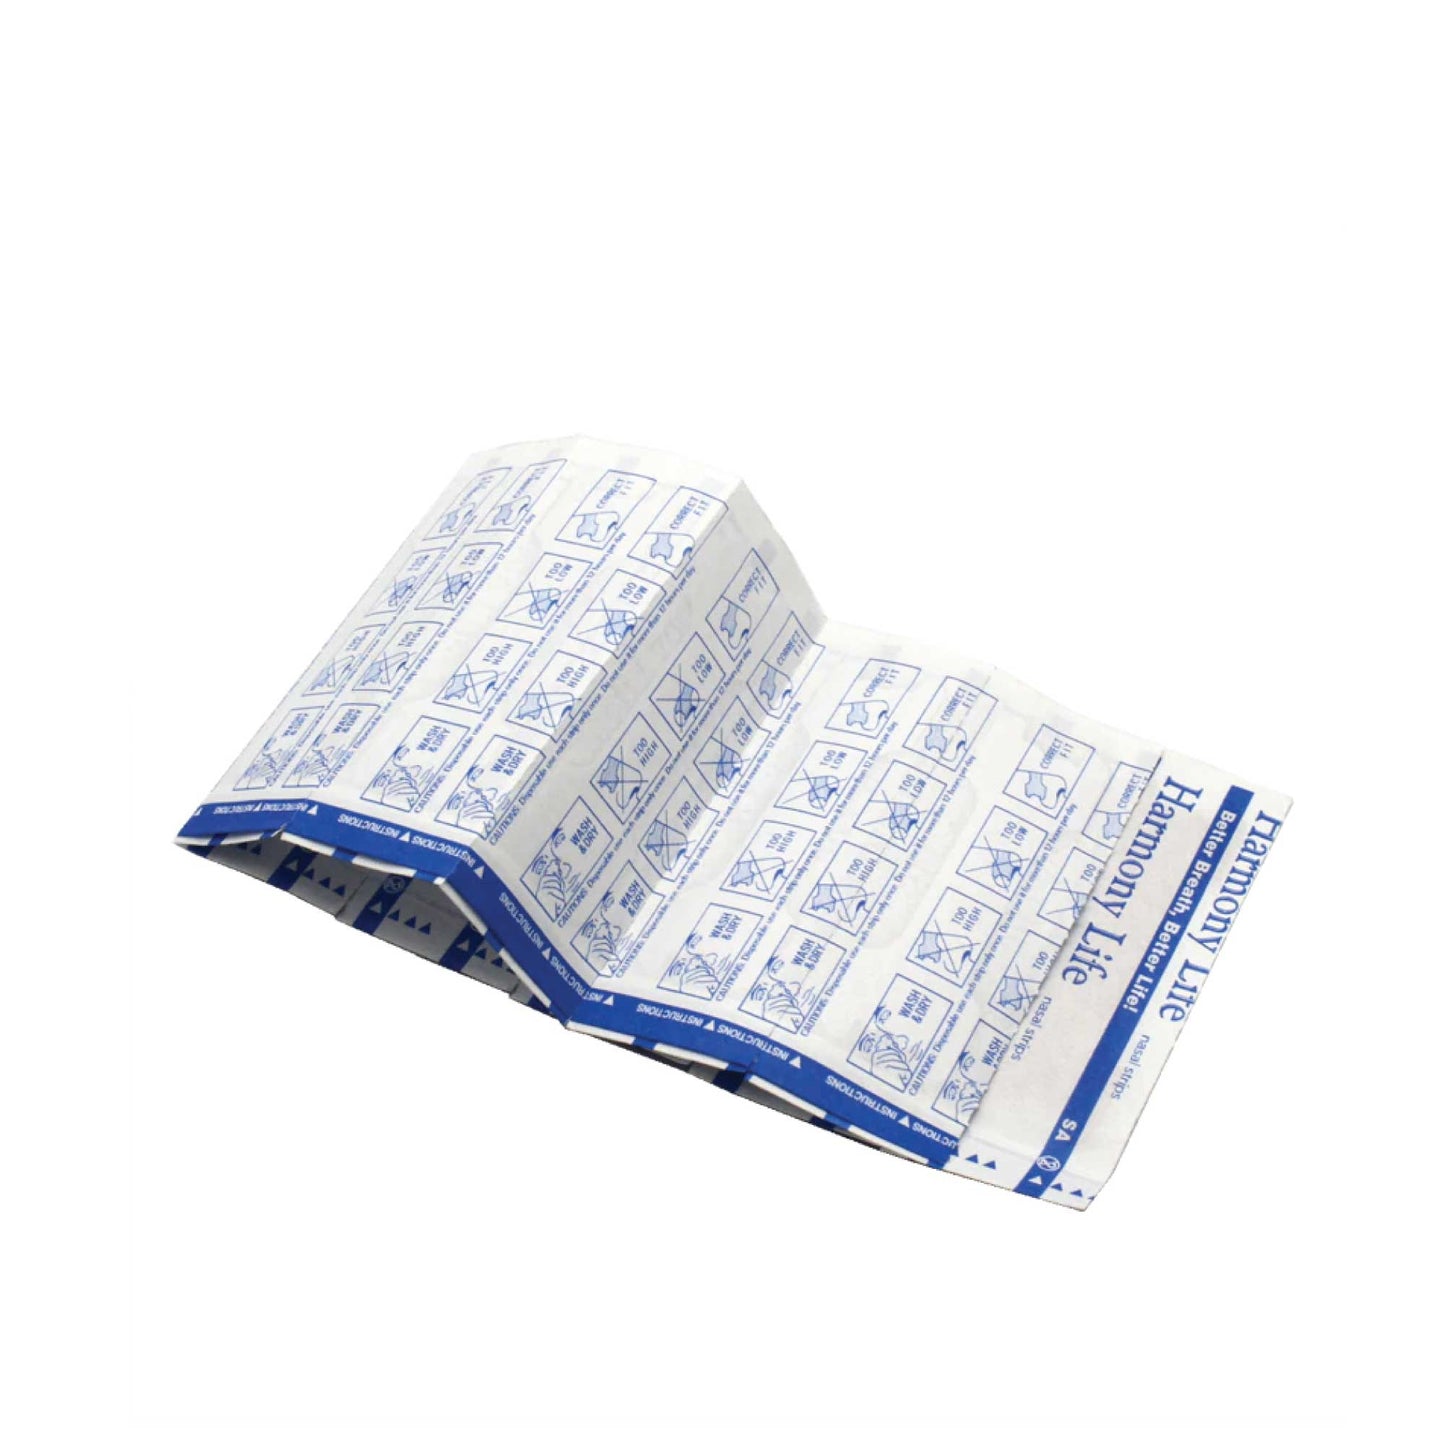 200x Anti Snore Aid Snoring Nasal Strips - Nose Sleeping and Breathing Device